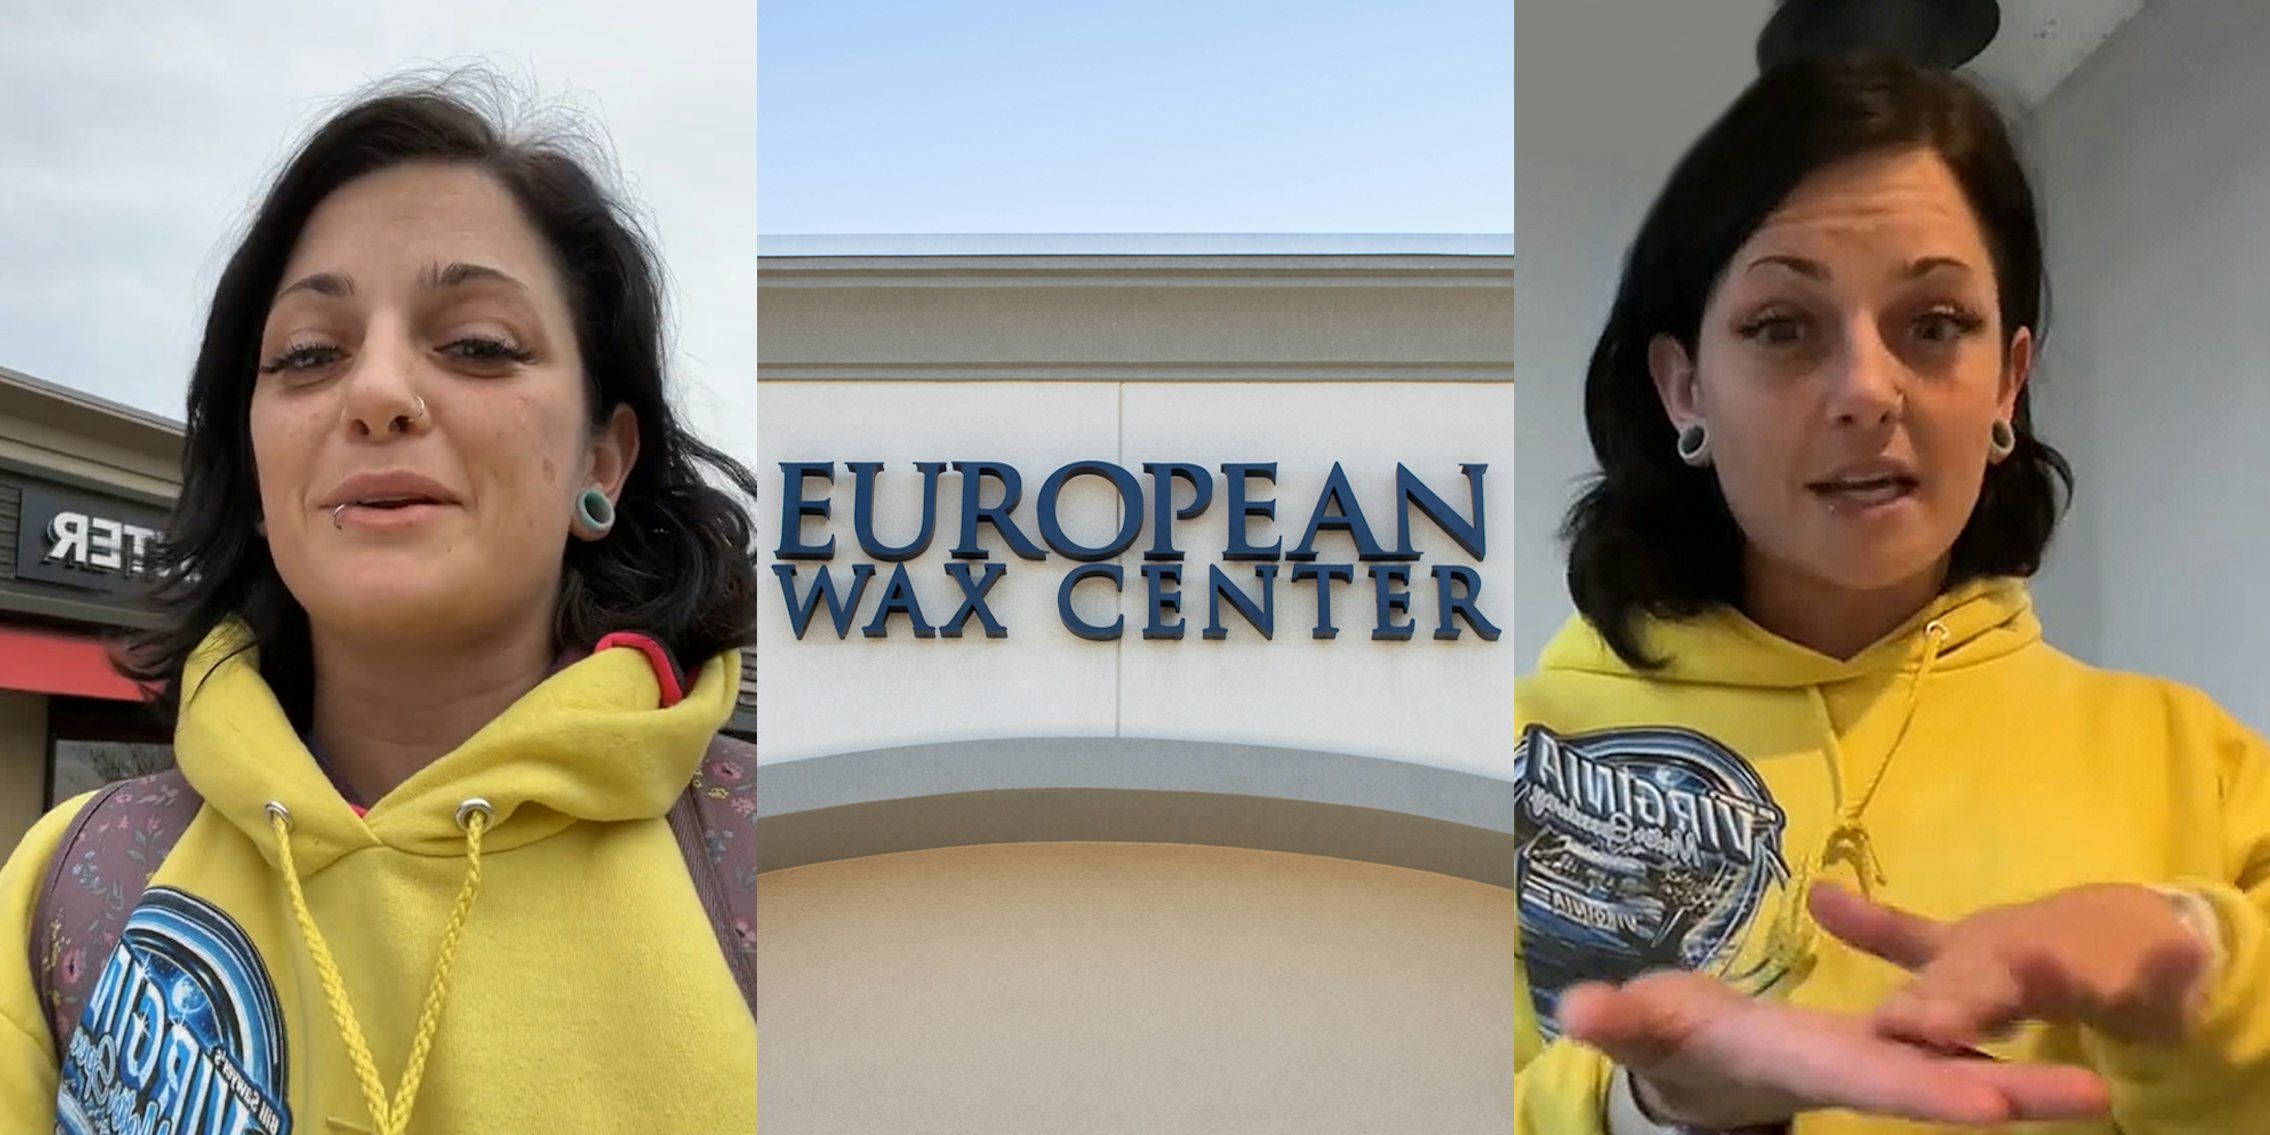 woman speaking outside of European Wax Center (l) European Wax Center sign on building (c) woman speaking making waxing gesture with hands in front of gray walls (r)